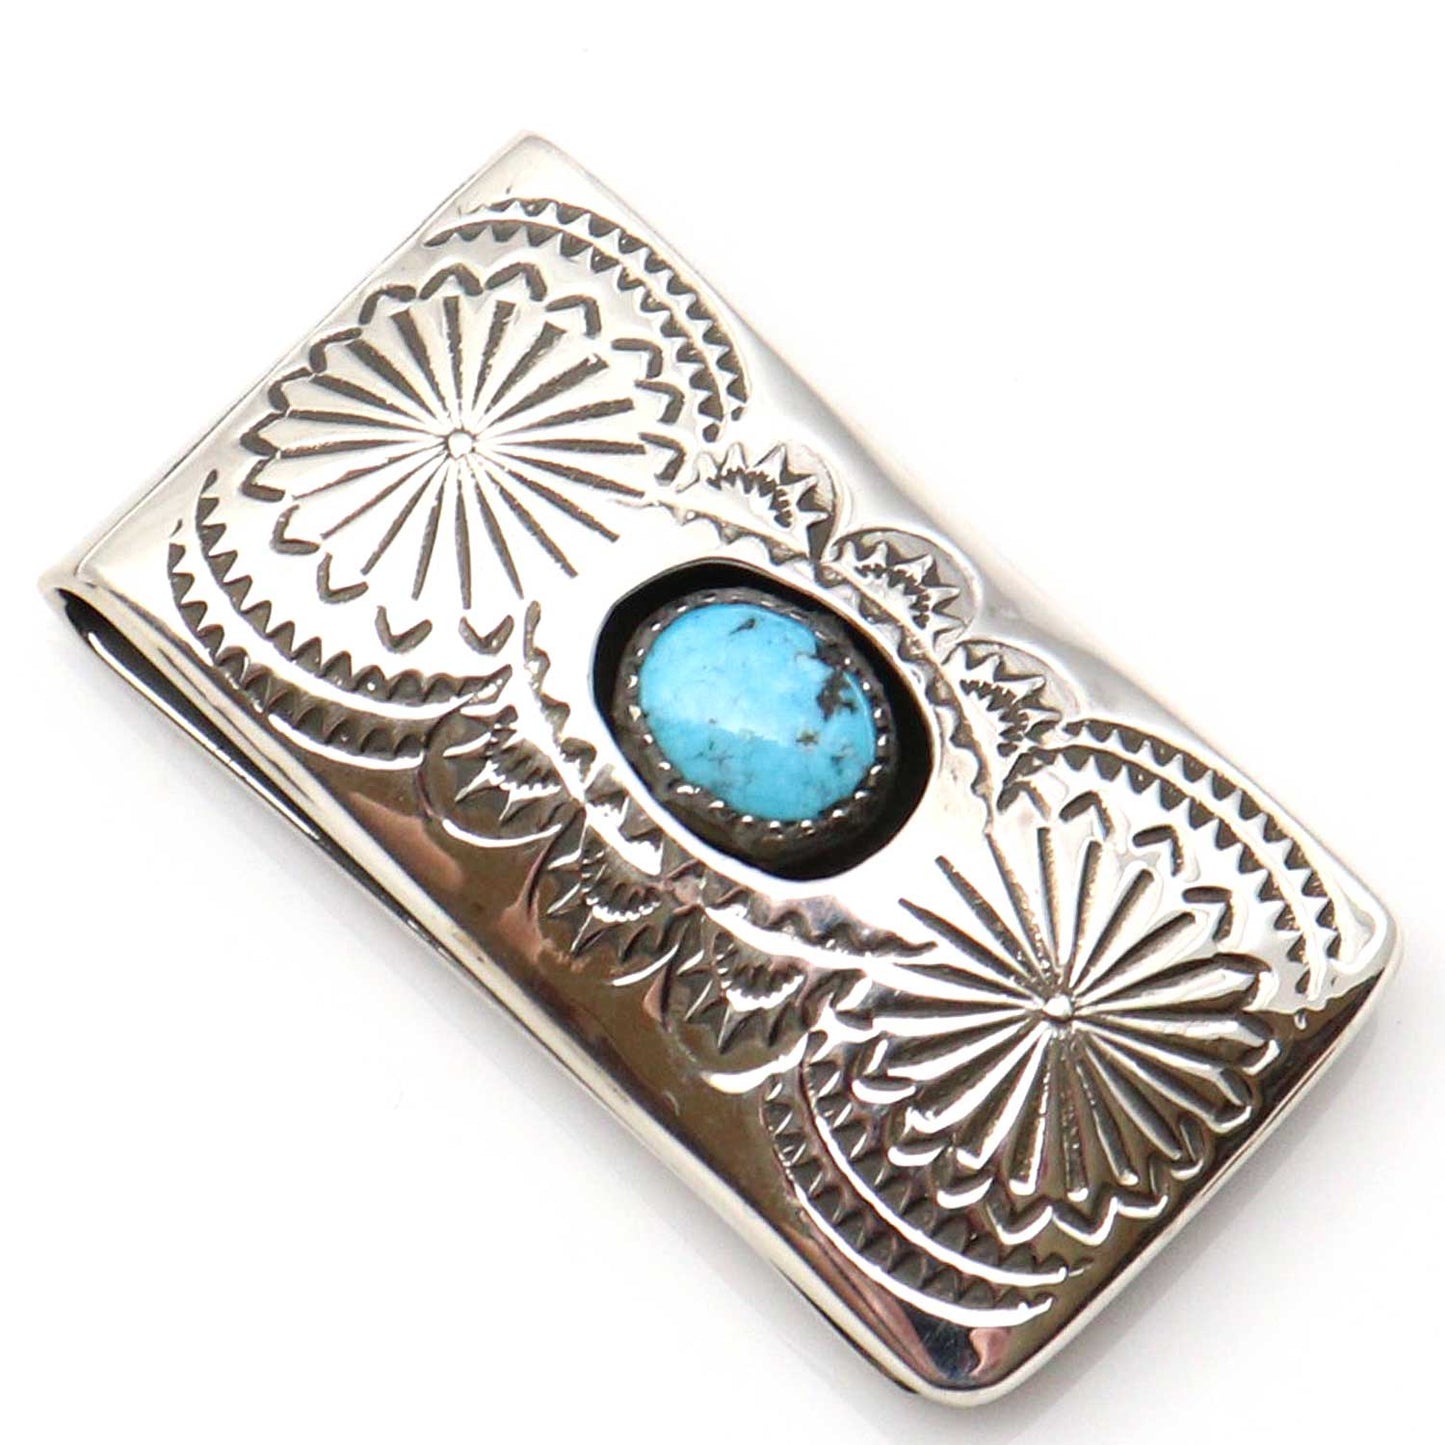 Navajo Hand Stamped Silver Money Clip By Skeets